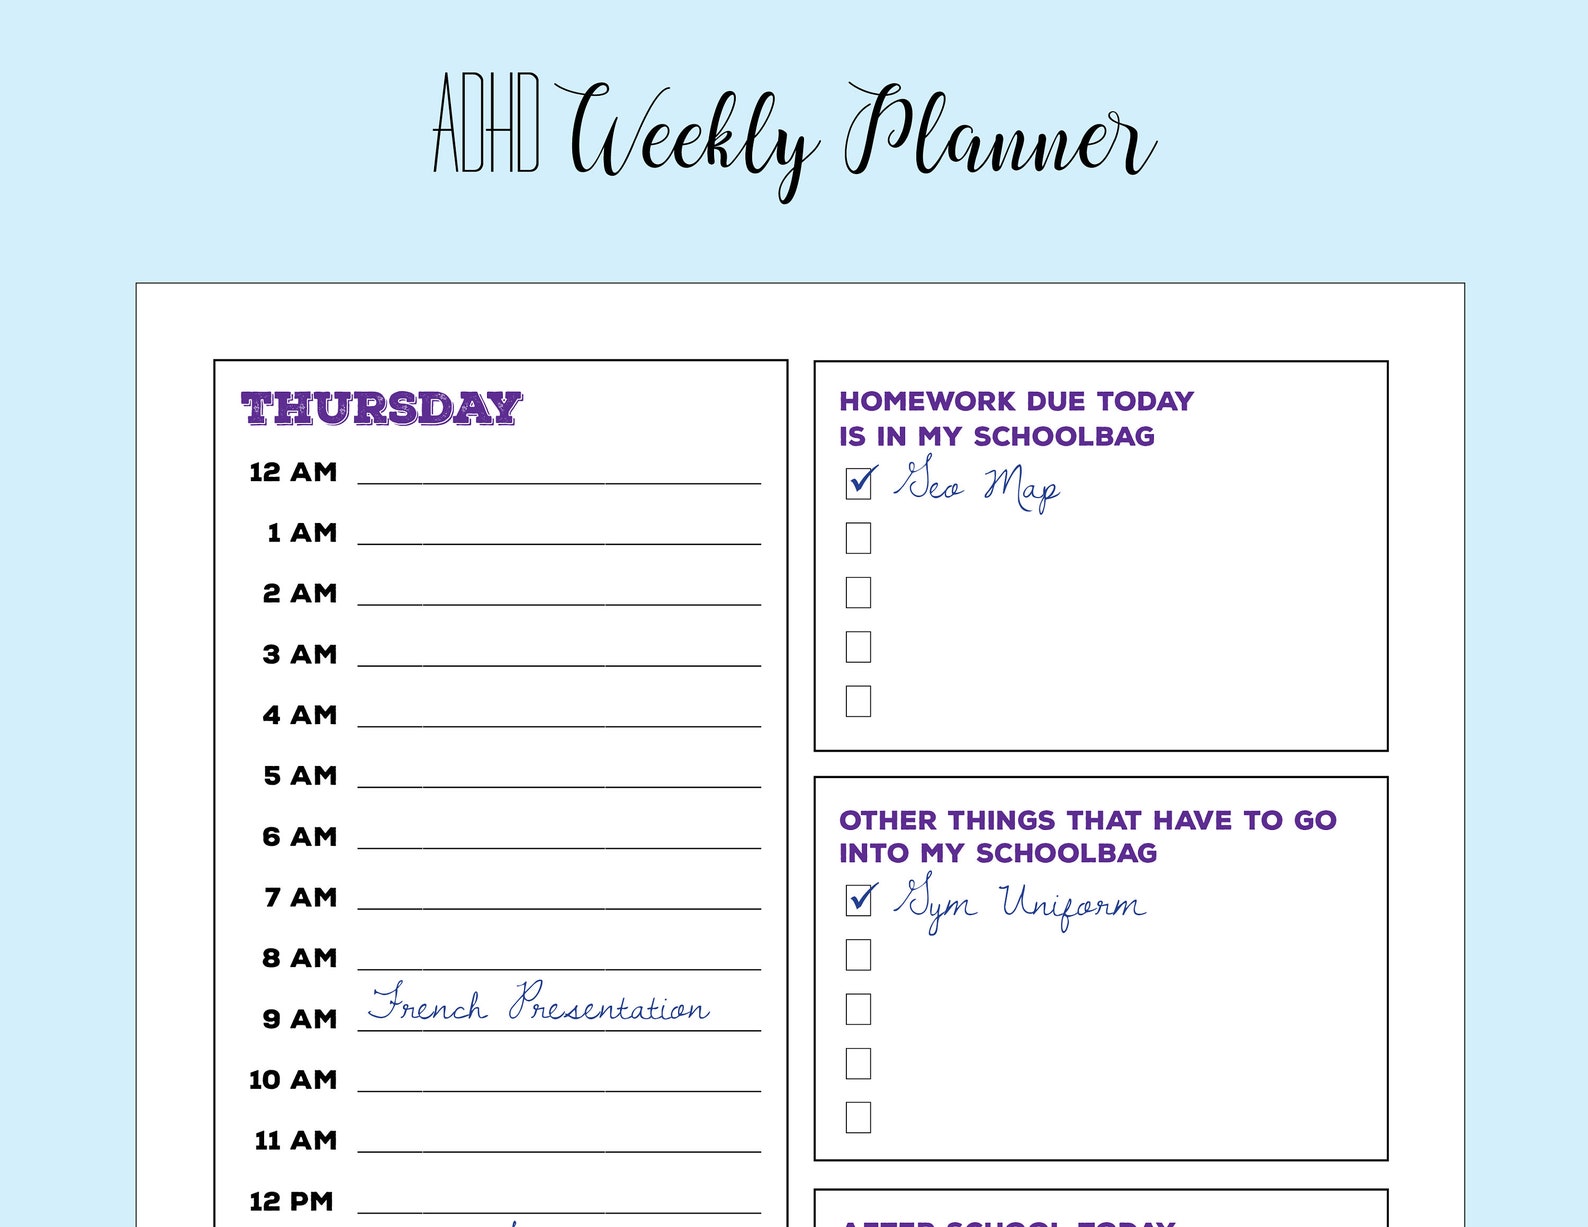 ADHD Weekly Planner Etsy